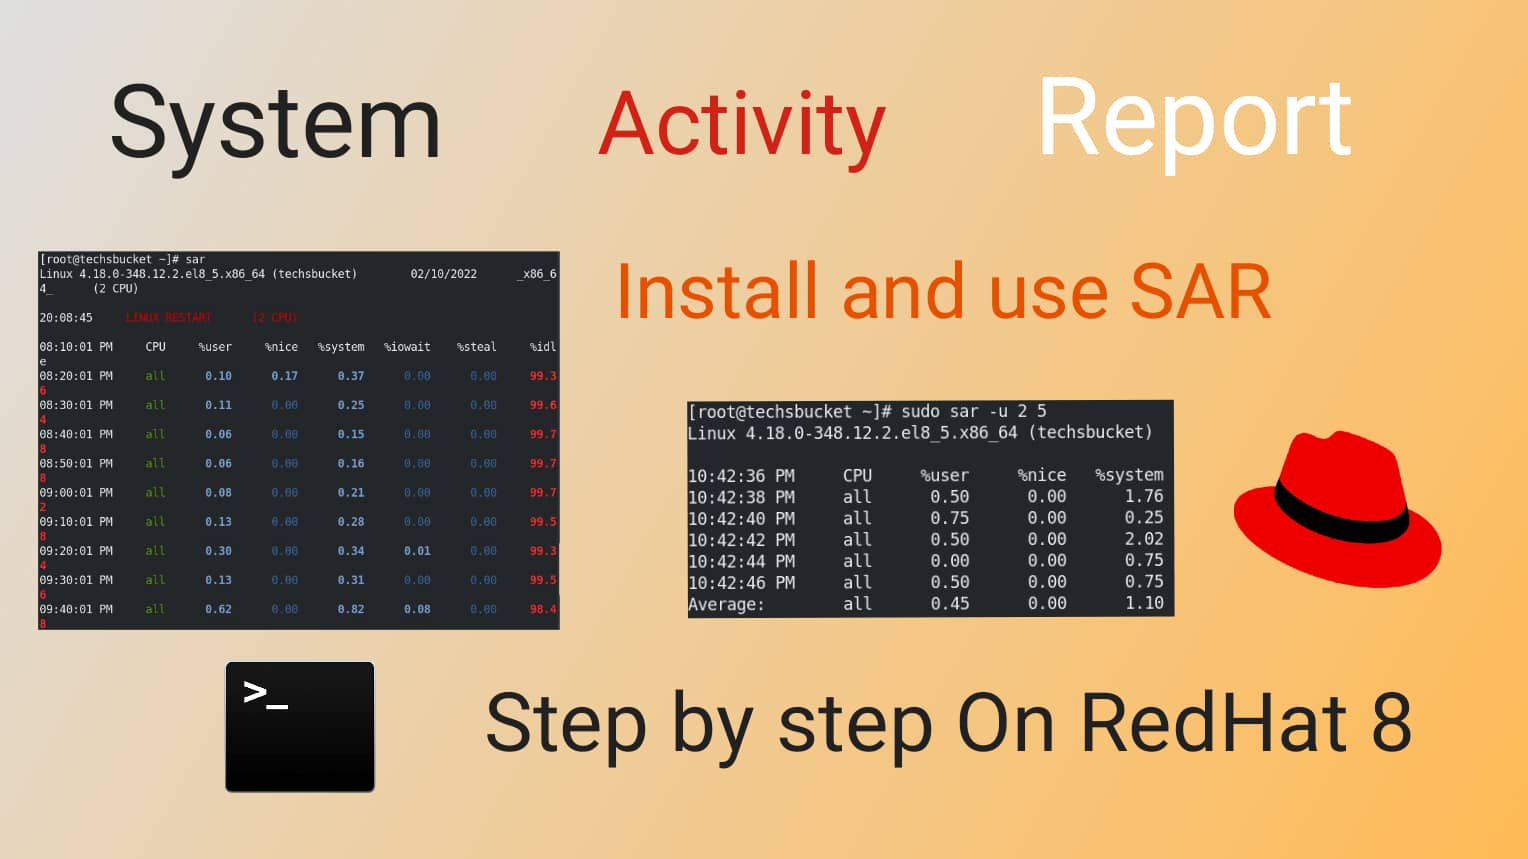 How to install and use SAR in RedHat 8 / CentOS 8